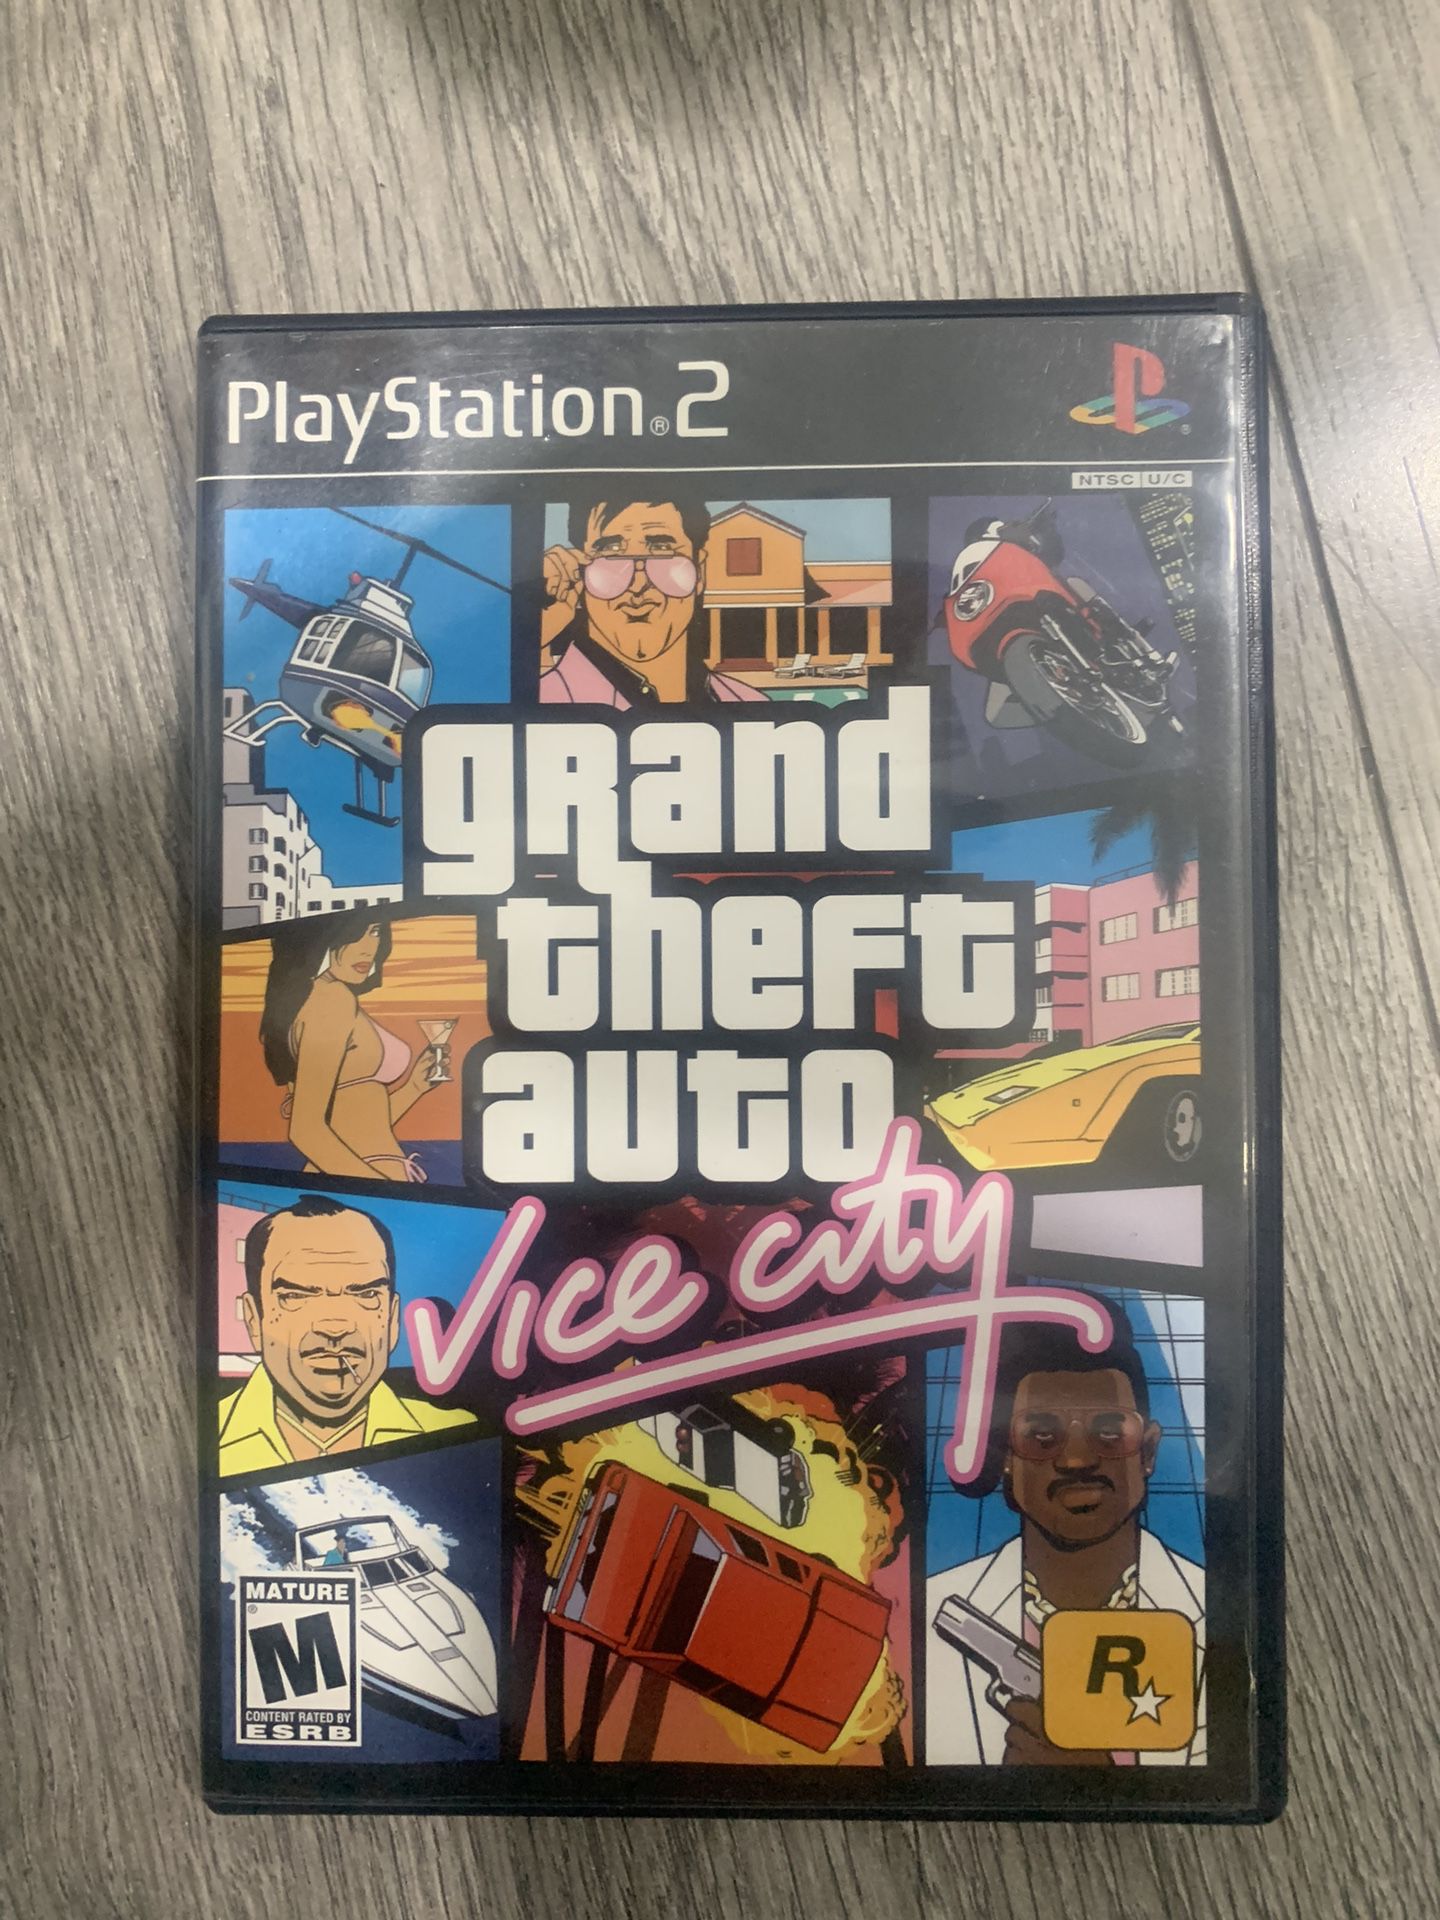 Grand Theft Air Vice City For PS2 (complete With Map, Mint Condition)